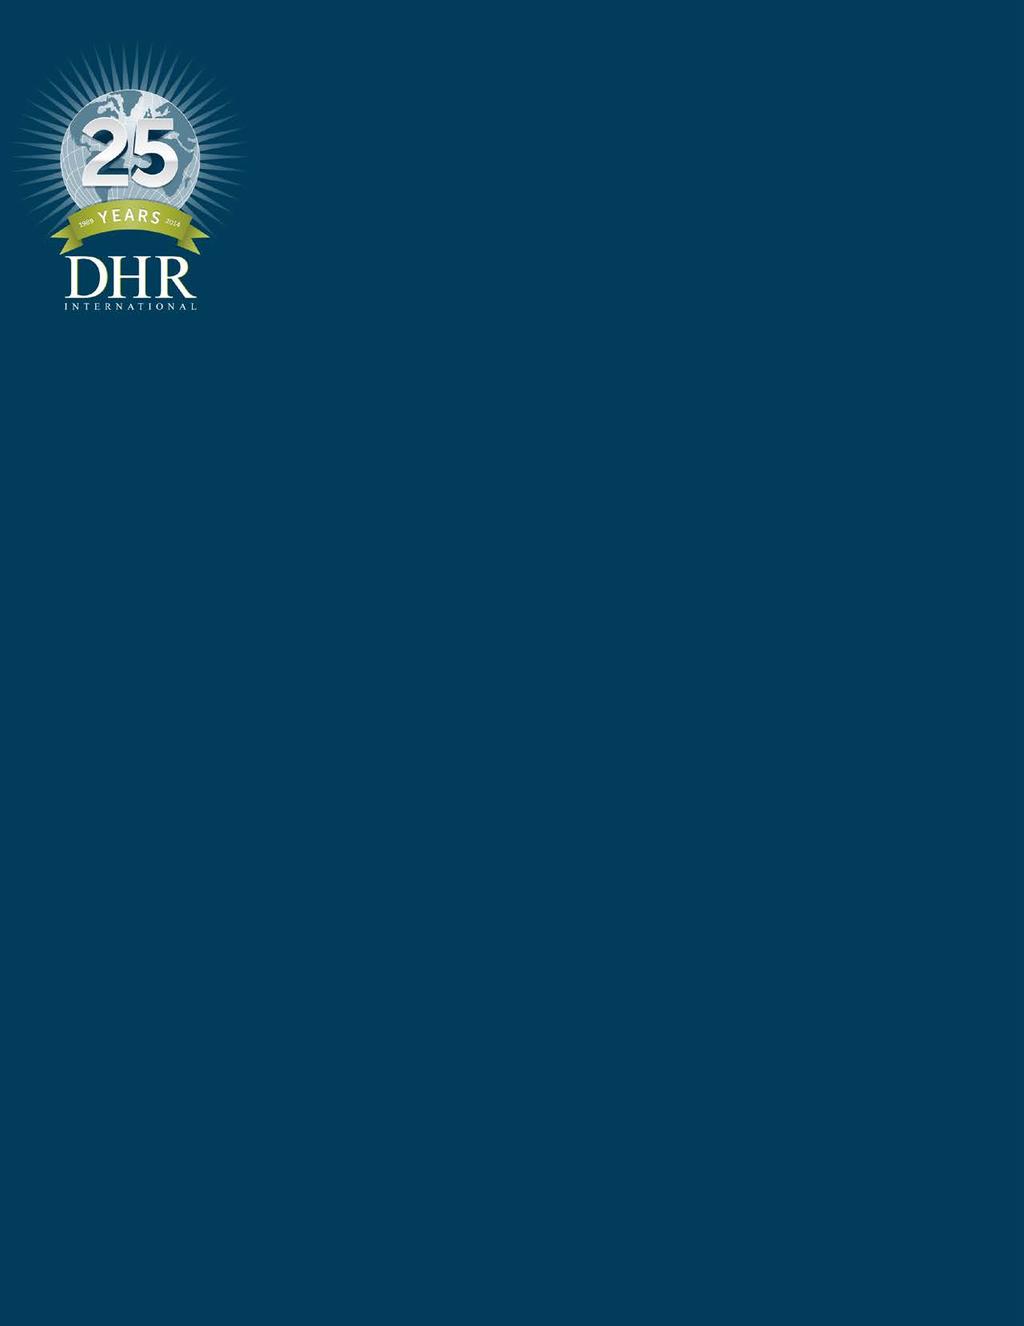 Established in 1989, DHR International is one of the largest retained executive search firms in the world, with more than 50 offices around the globe.